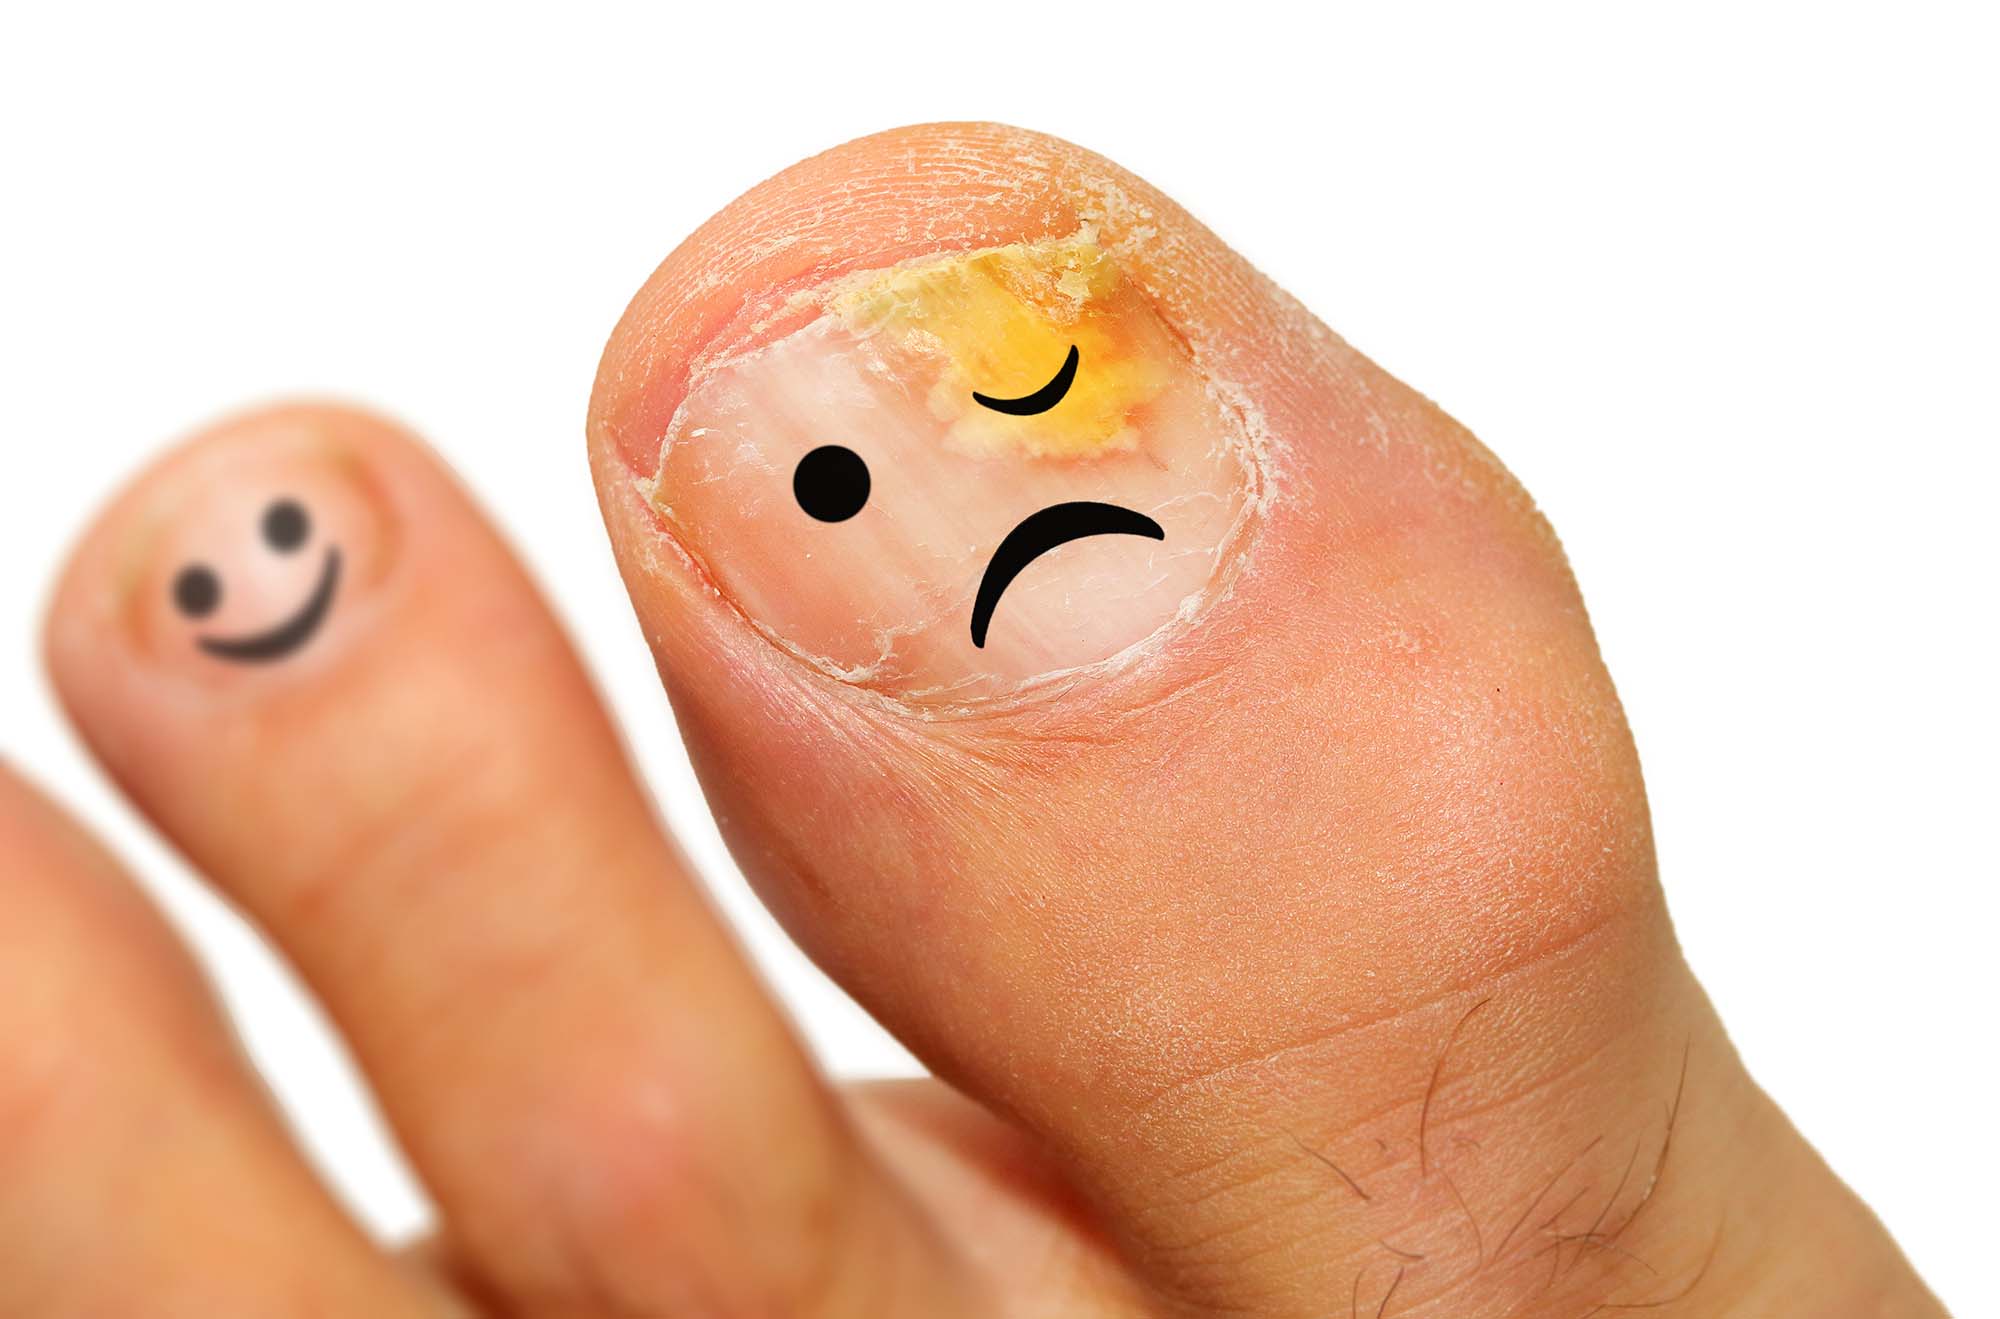 Onychomycosis fungal infection of the nail. It is the most common disease of the nails. It is an actual skin infection with the Trichophyton rubrum is the most common dermatophyte.